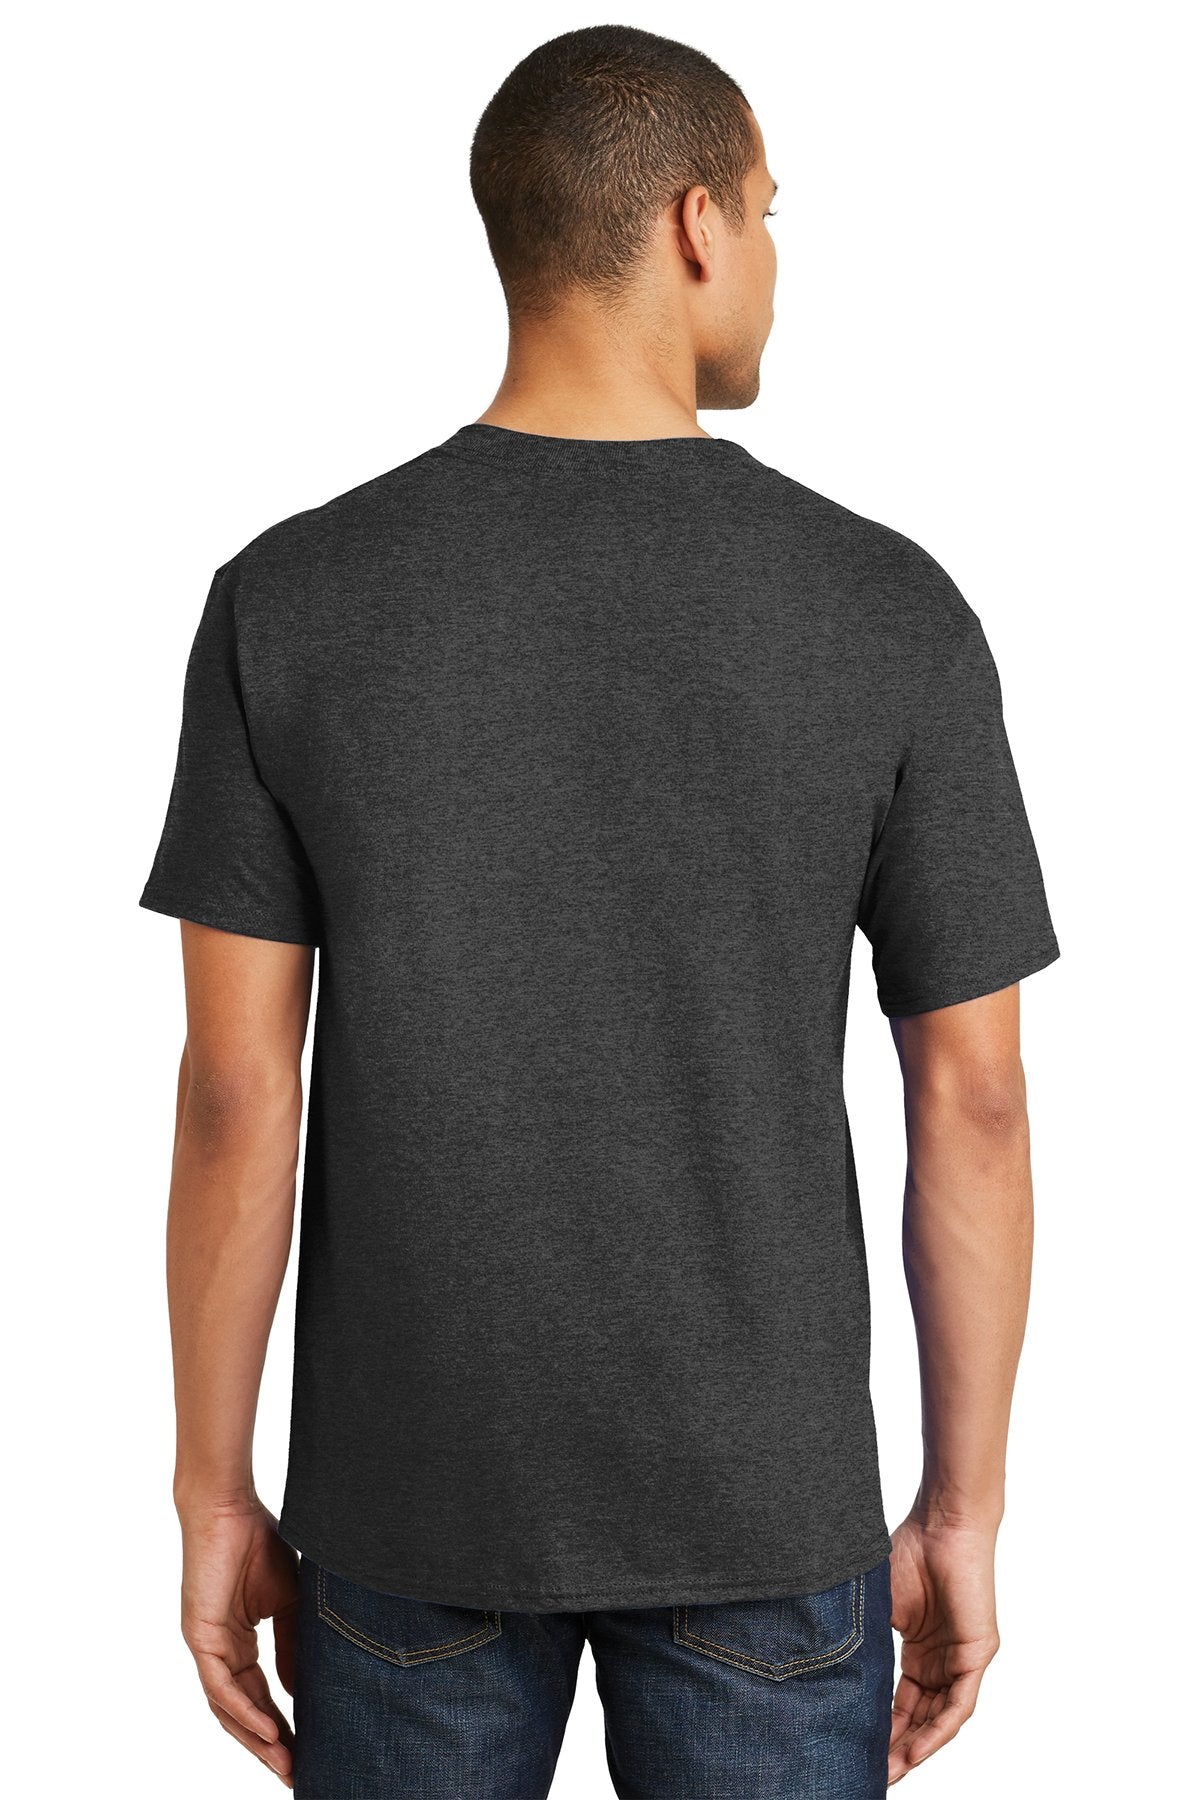 hanes beefycotton t shirt 5180 charcoal heather